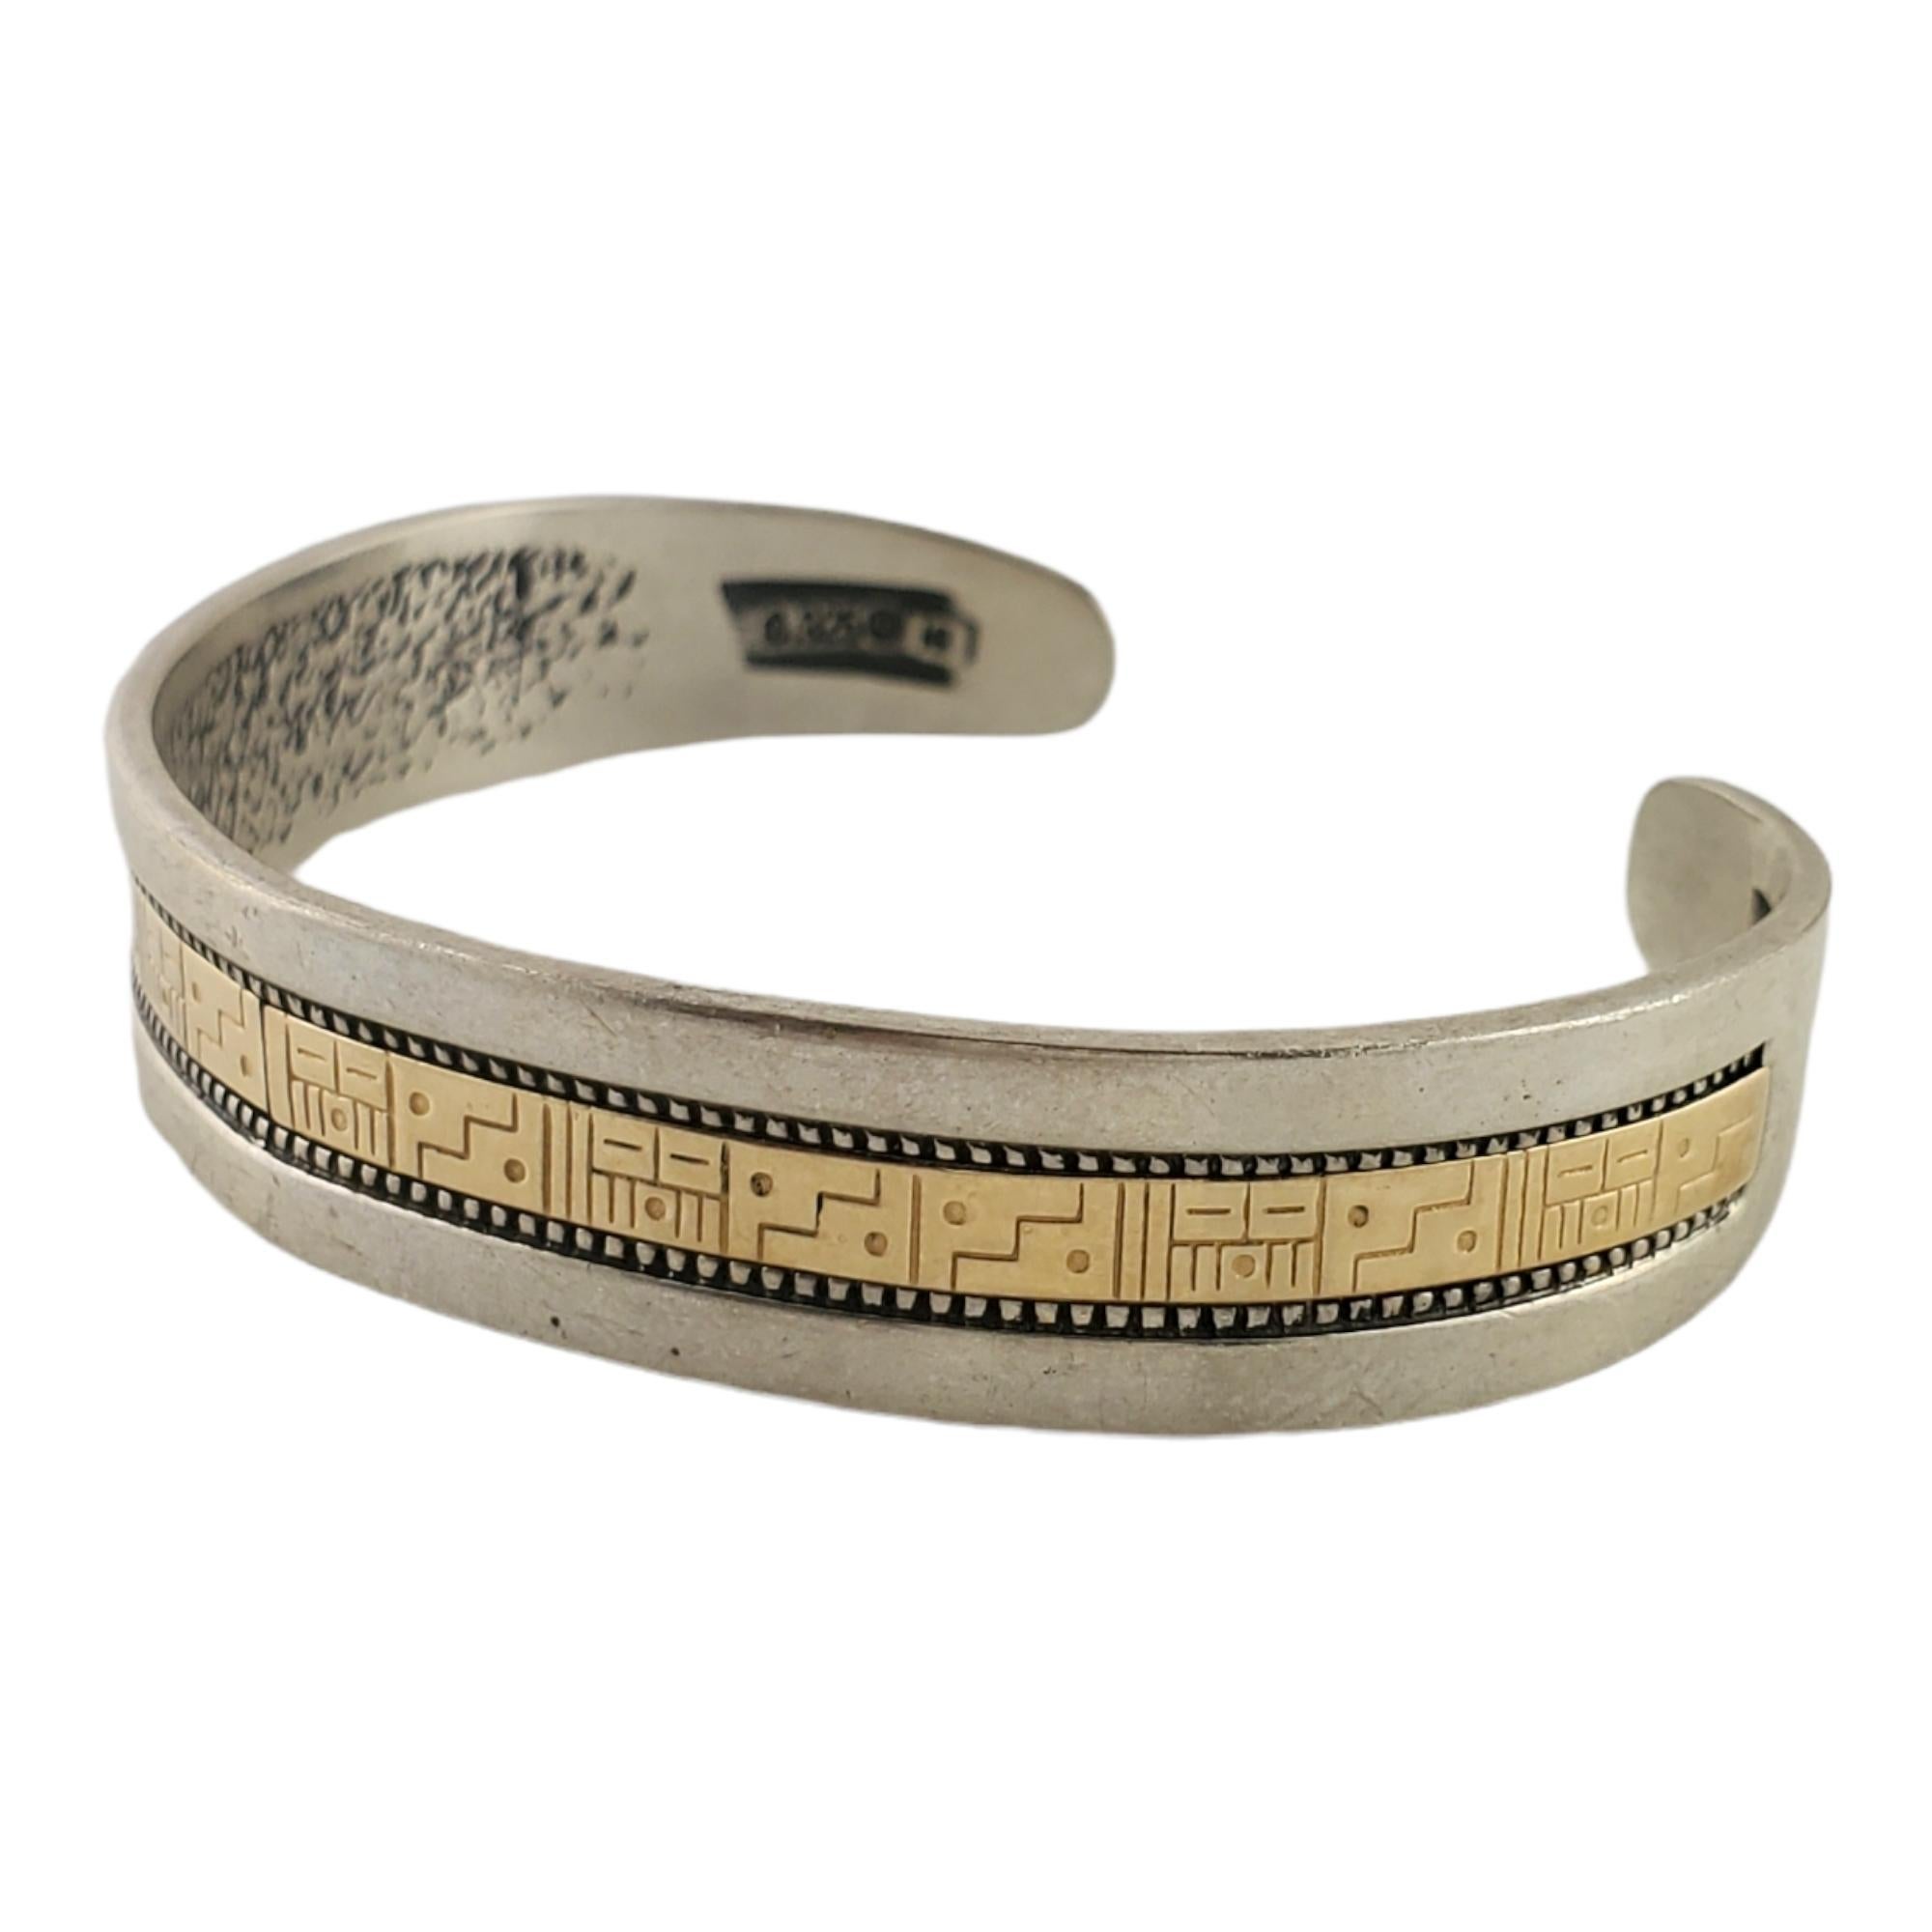 Roderick Tenorio RMT sterling silver and 14K gold cuff bracelet.

Marking: Relios hallmark, .925, ©, 14K, RMT.

Measures approx. 5 1/2